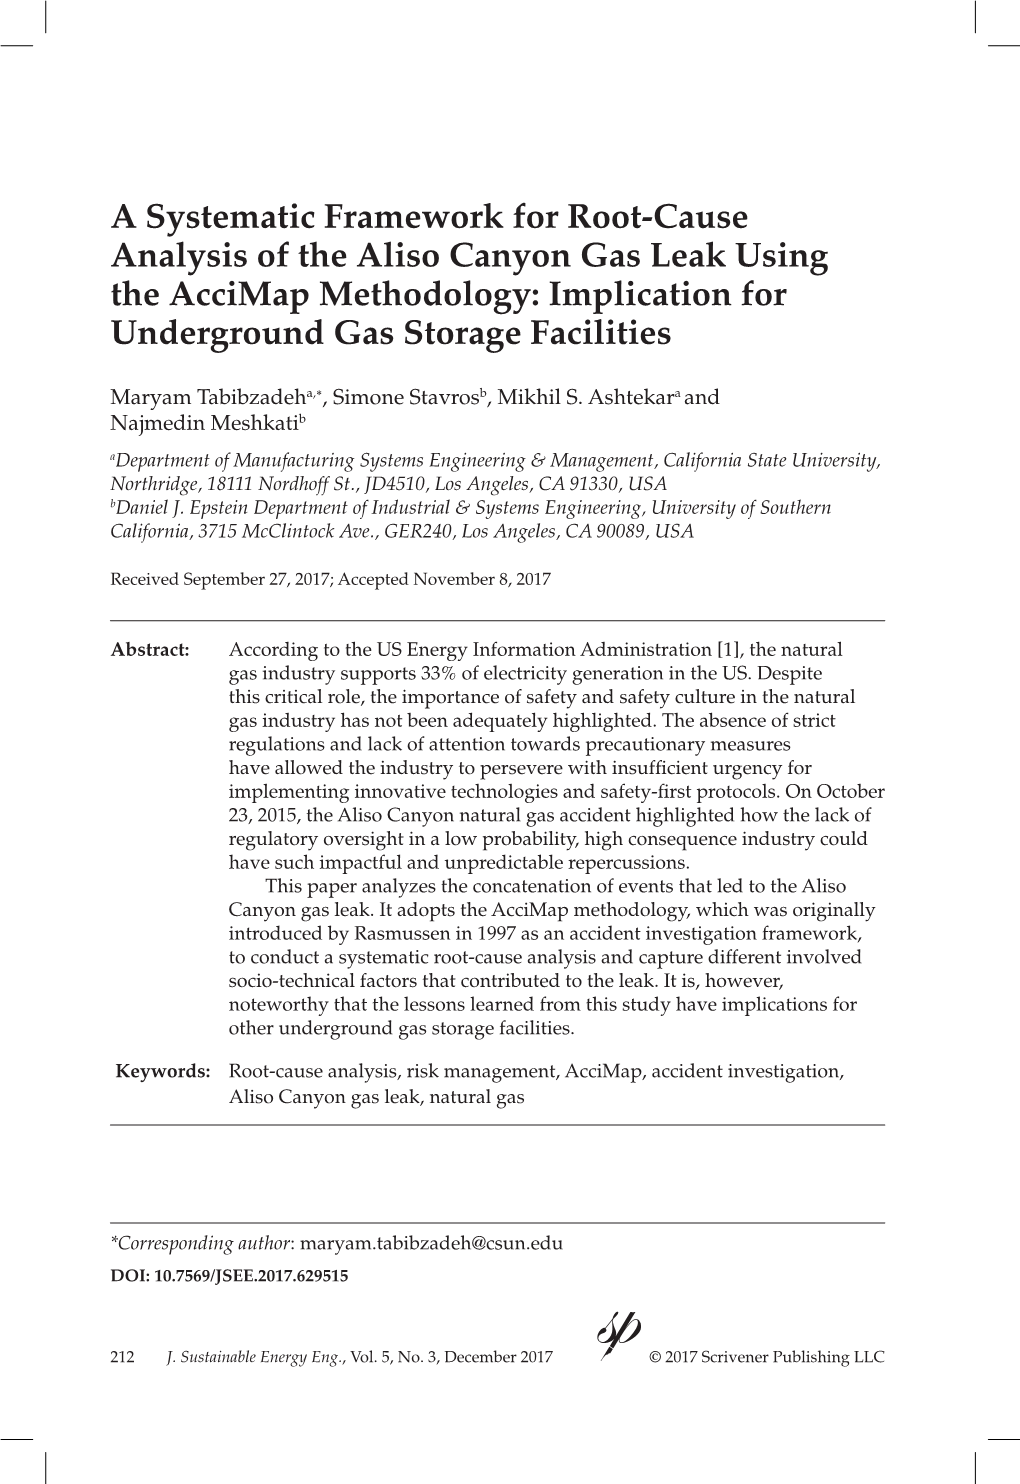 A Systematic Framework for Root-Cause Analysis of the Aliso Canyon Gas Leak Using the Accimap Methodology: Implication for Underground Gas Storage Facilities